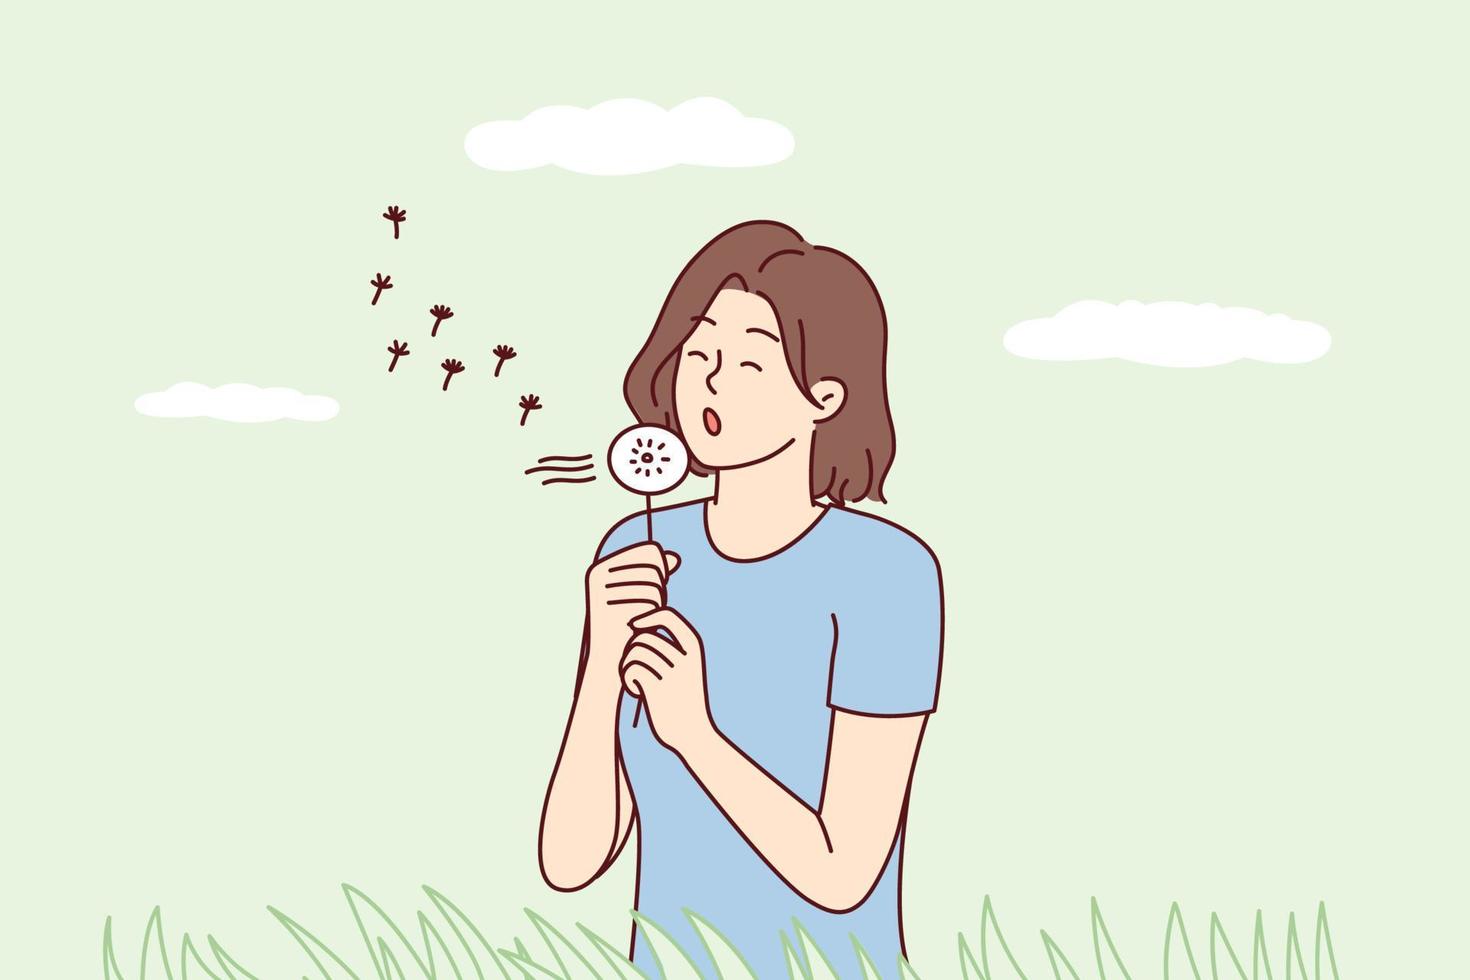 Carefree woman walks in clearing holding dandelion in hands and blows off petals flying away through wind. Relaxed girl walks along green meadow among grass enjoying spring weather. Flat vector design